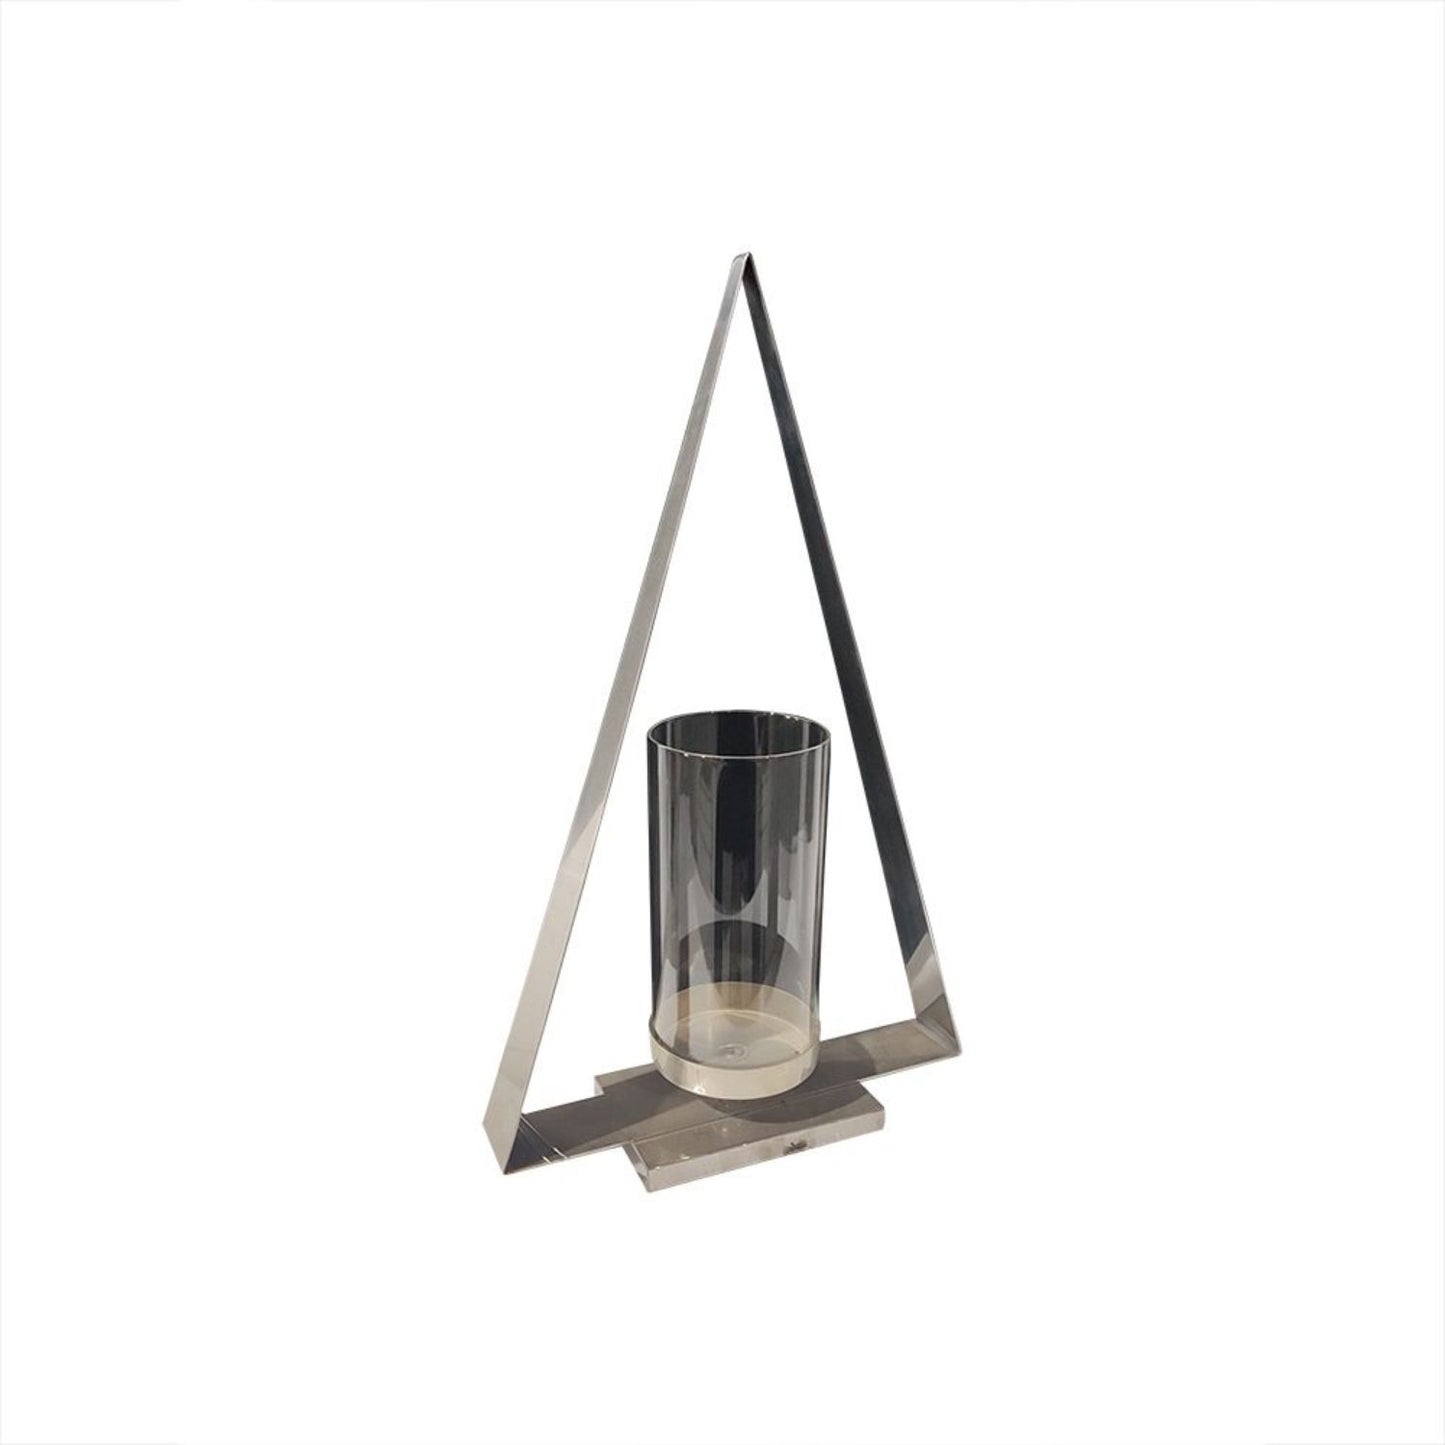 Triangular nickel plated candle holder